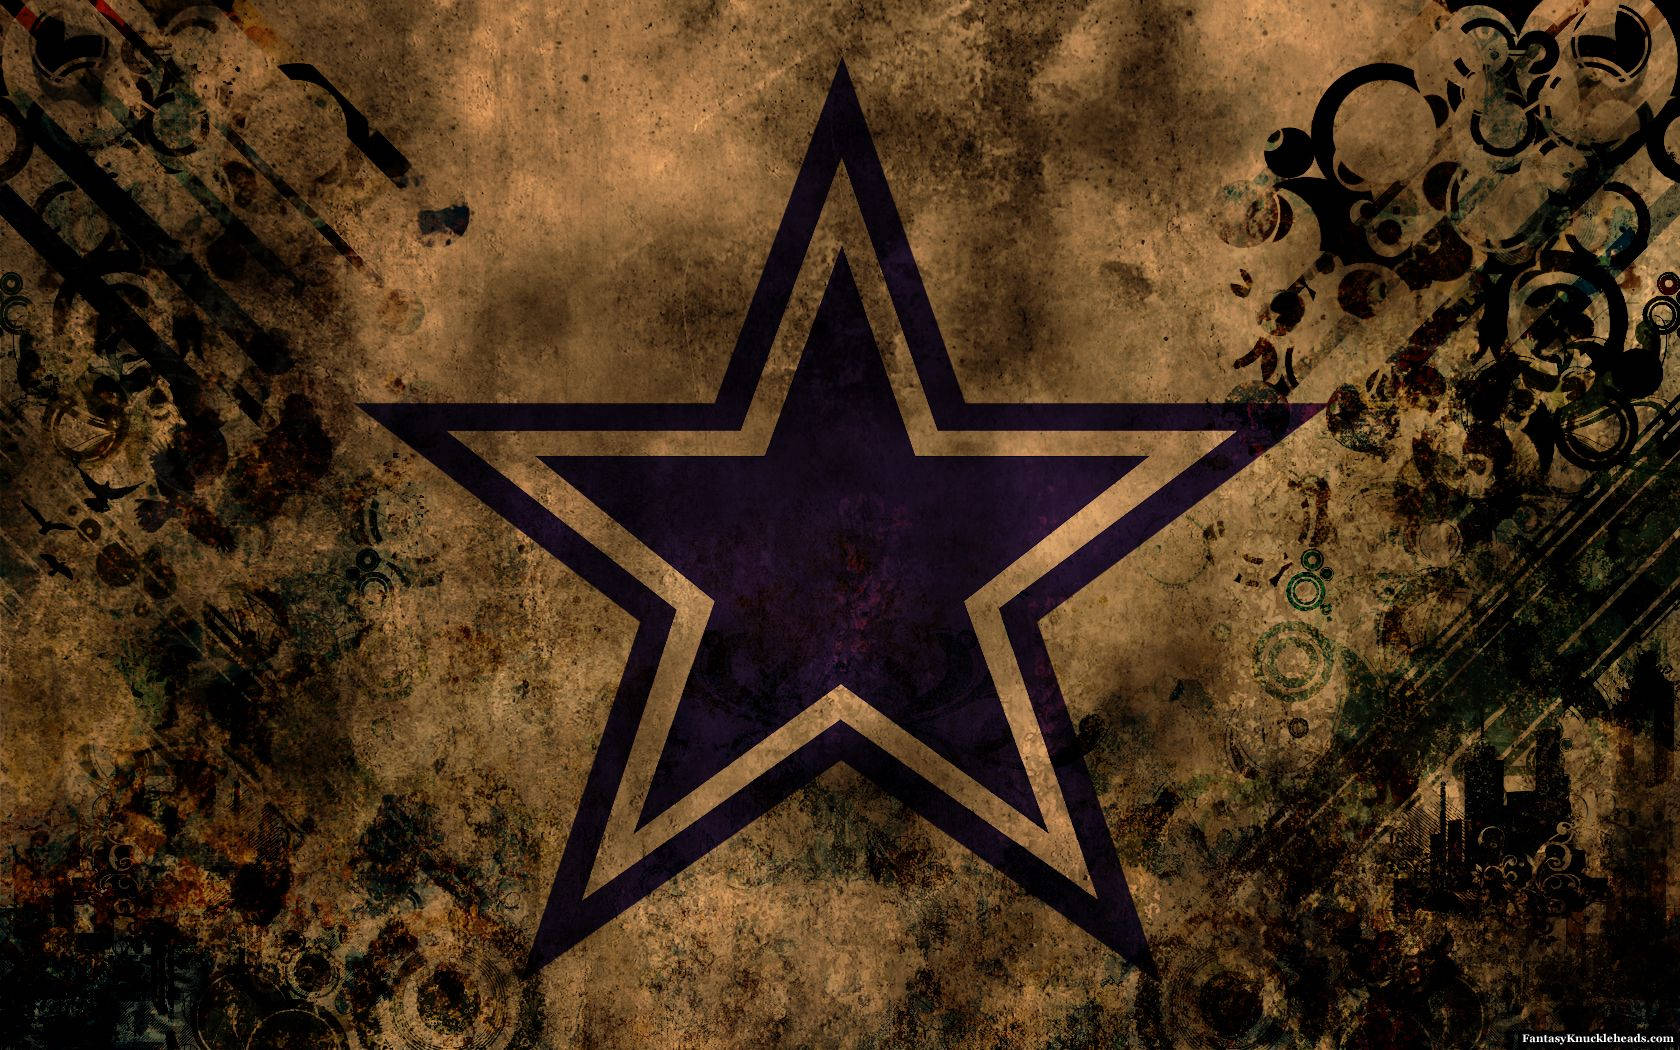 Dallas Cowboys 1680X1050 Wallpaper and Background Image